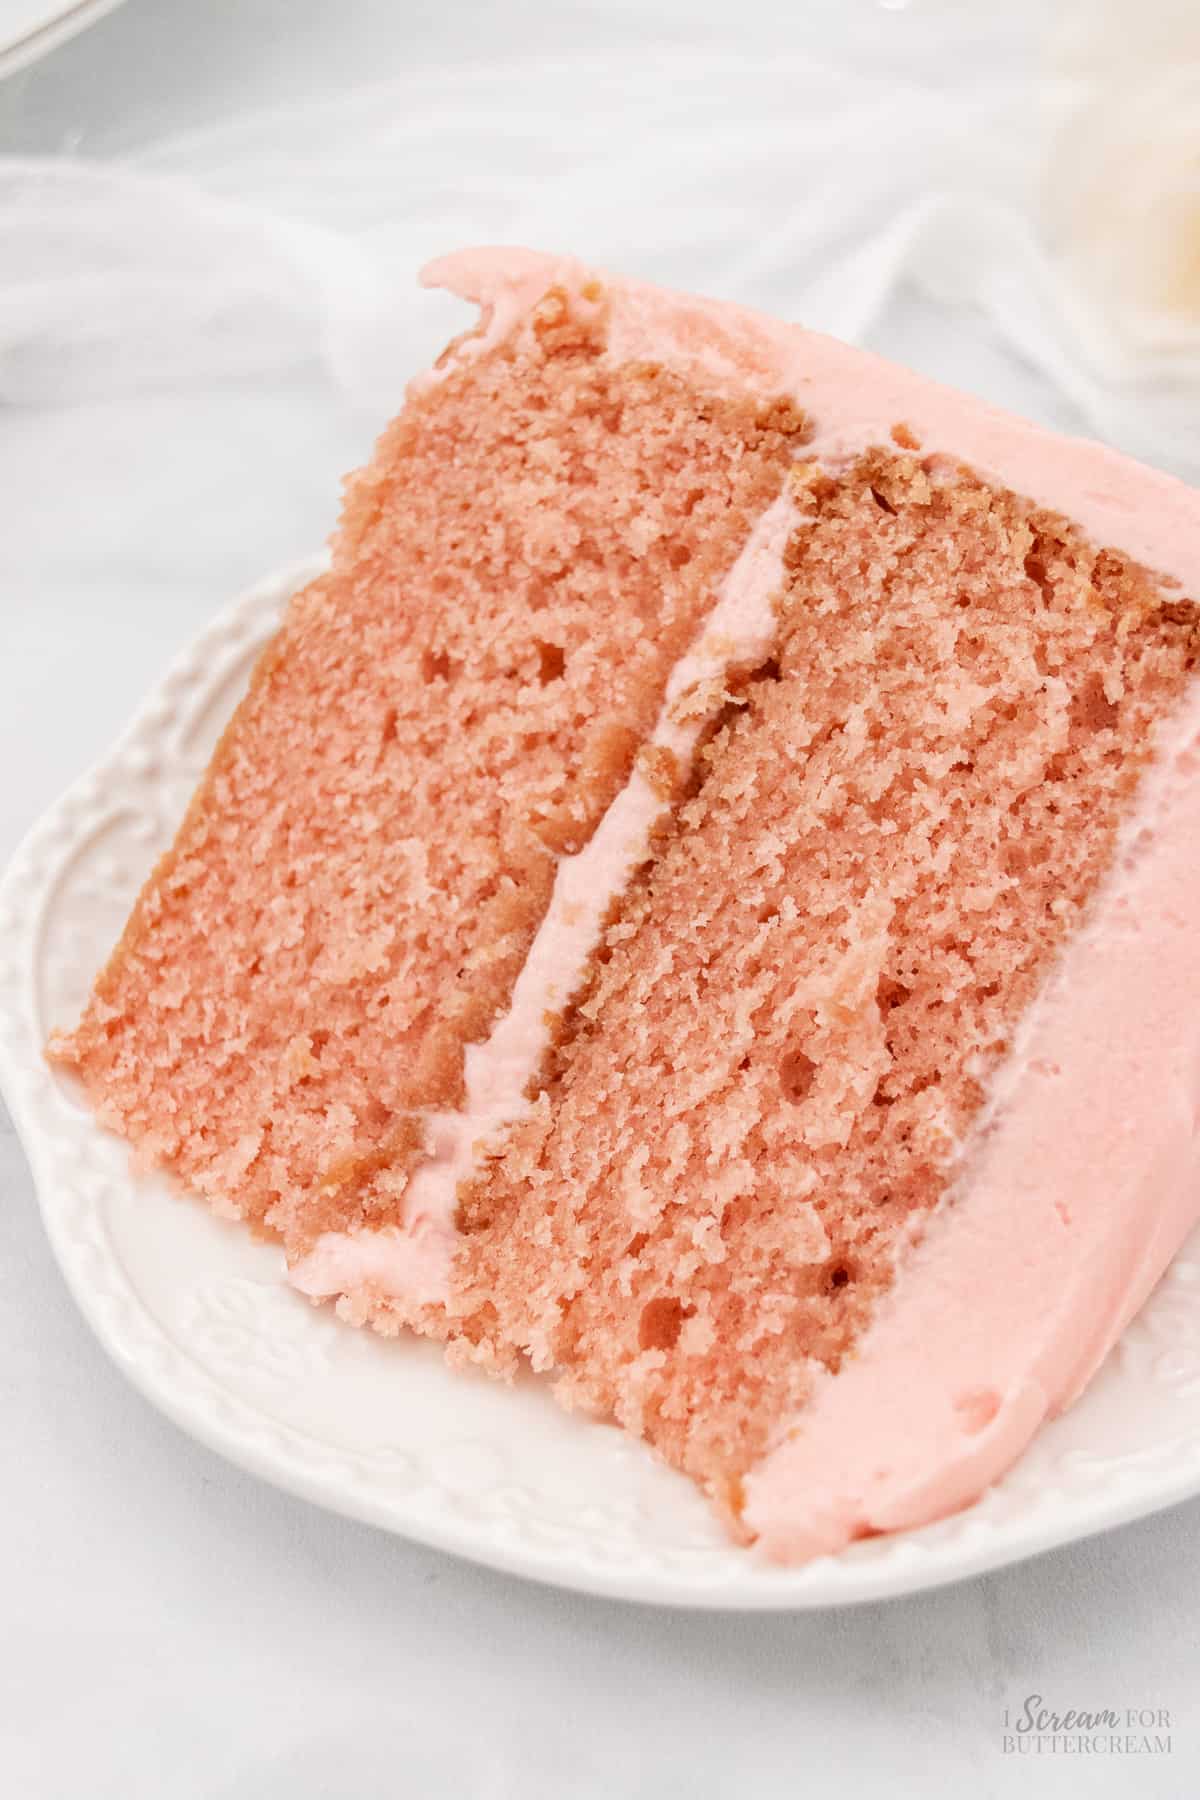 Top down image of a large slice of strawberry cake from scratch on a white plate.